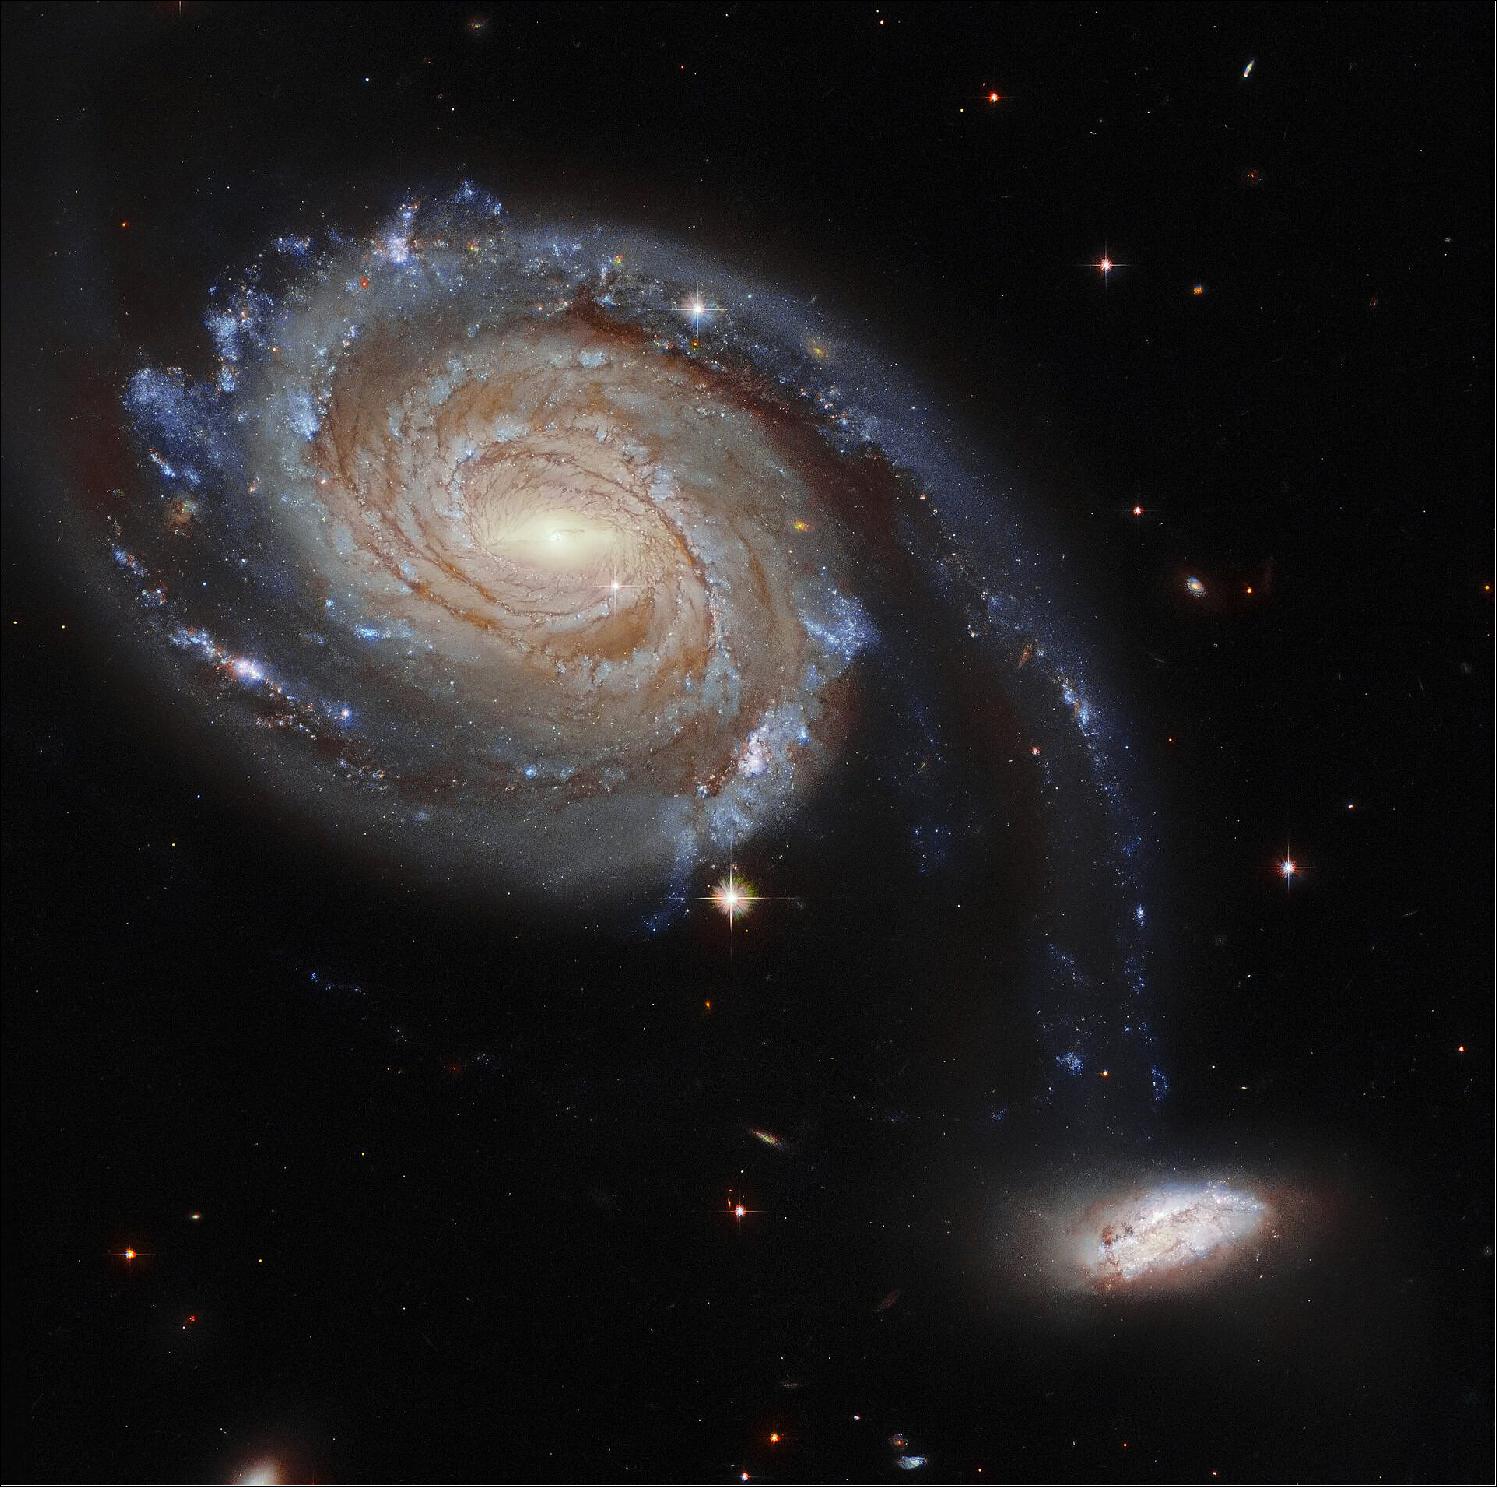 Figure 36: Hubble observed Arp 86 as part of a larger effort to understand the connections between young stars and the clouds of cold gas in which they form. Hubble gazed into star clusters and clouds of gas and dust in a variety of environments dotted throughout nearby galaxies. Combined with measurements from ALMA, a gigantic radio telescope perched high in the Chilean Andes, these Hubble observations provide a treasure trove of data for astronomers working to understand how stars are born (image credit: ESA/Hubble and NASA, Dark Energy Survey, J. Dalcanton; CC BY 4.0)